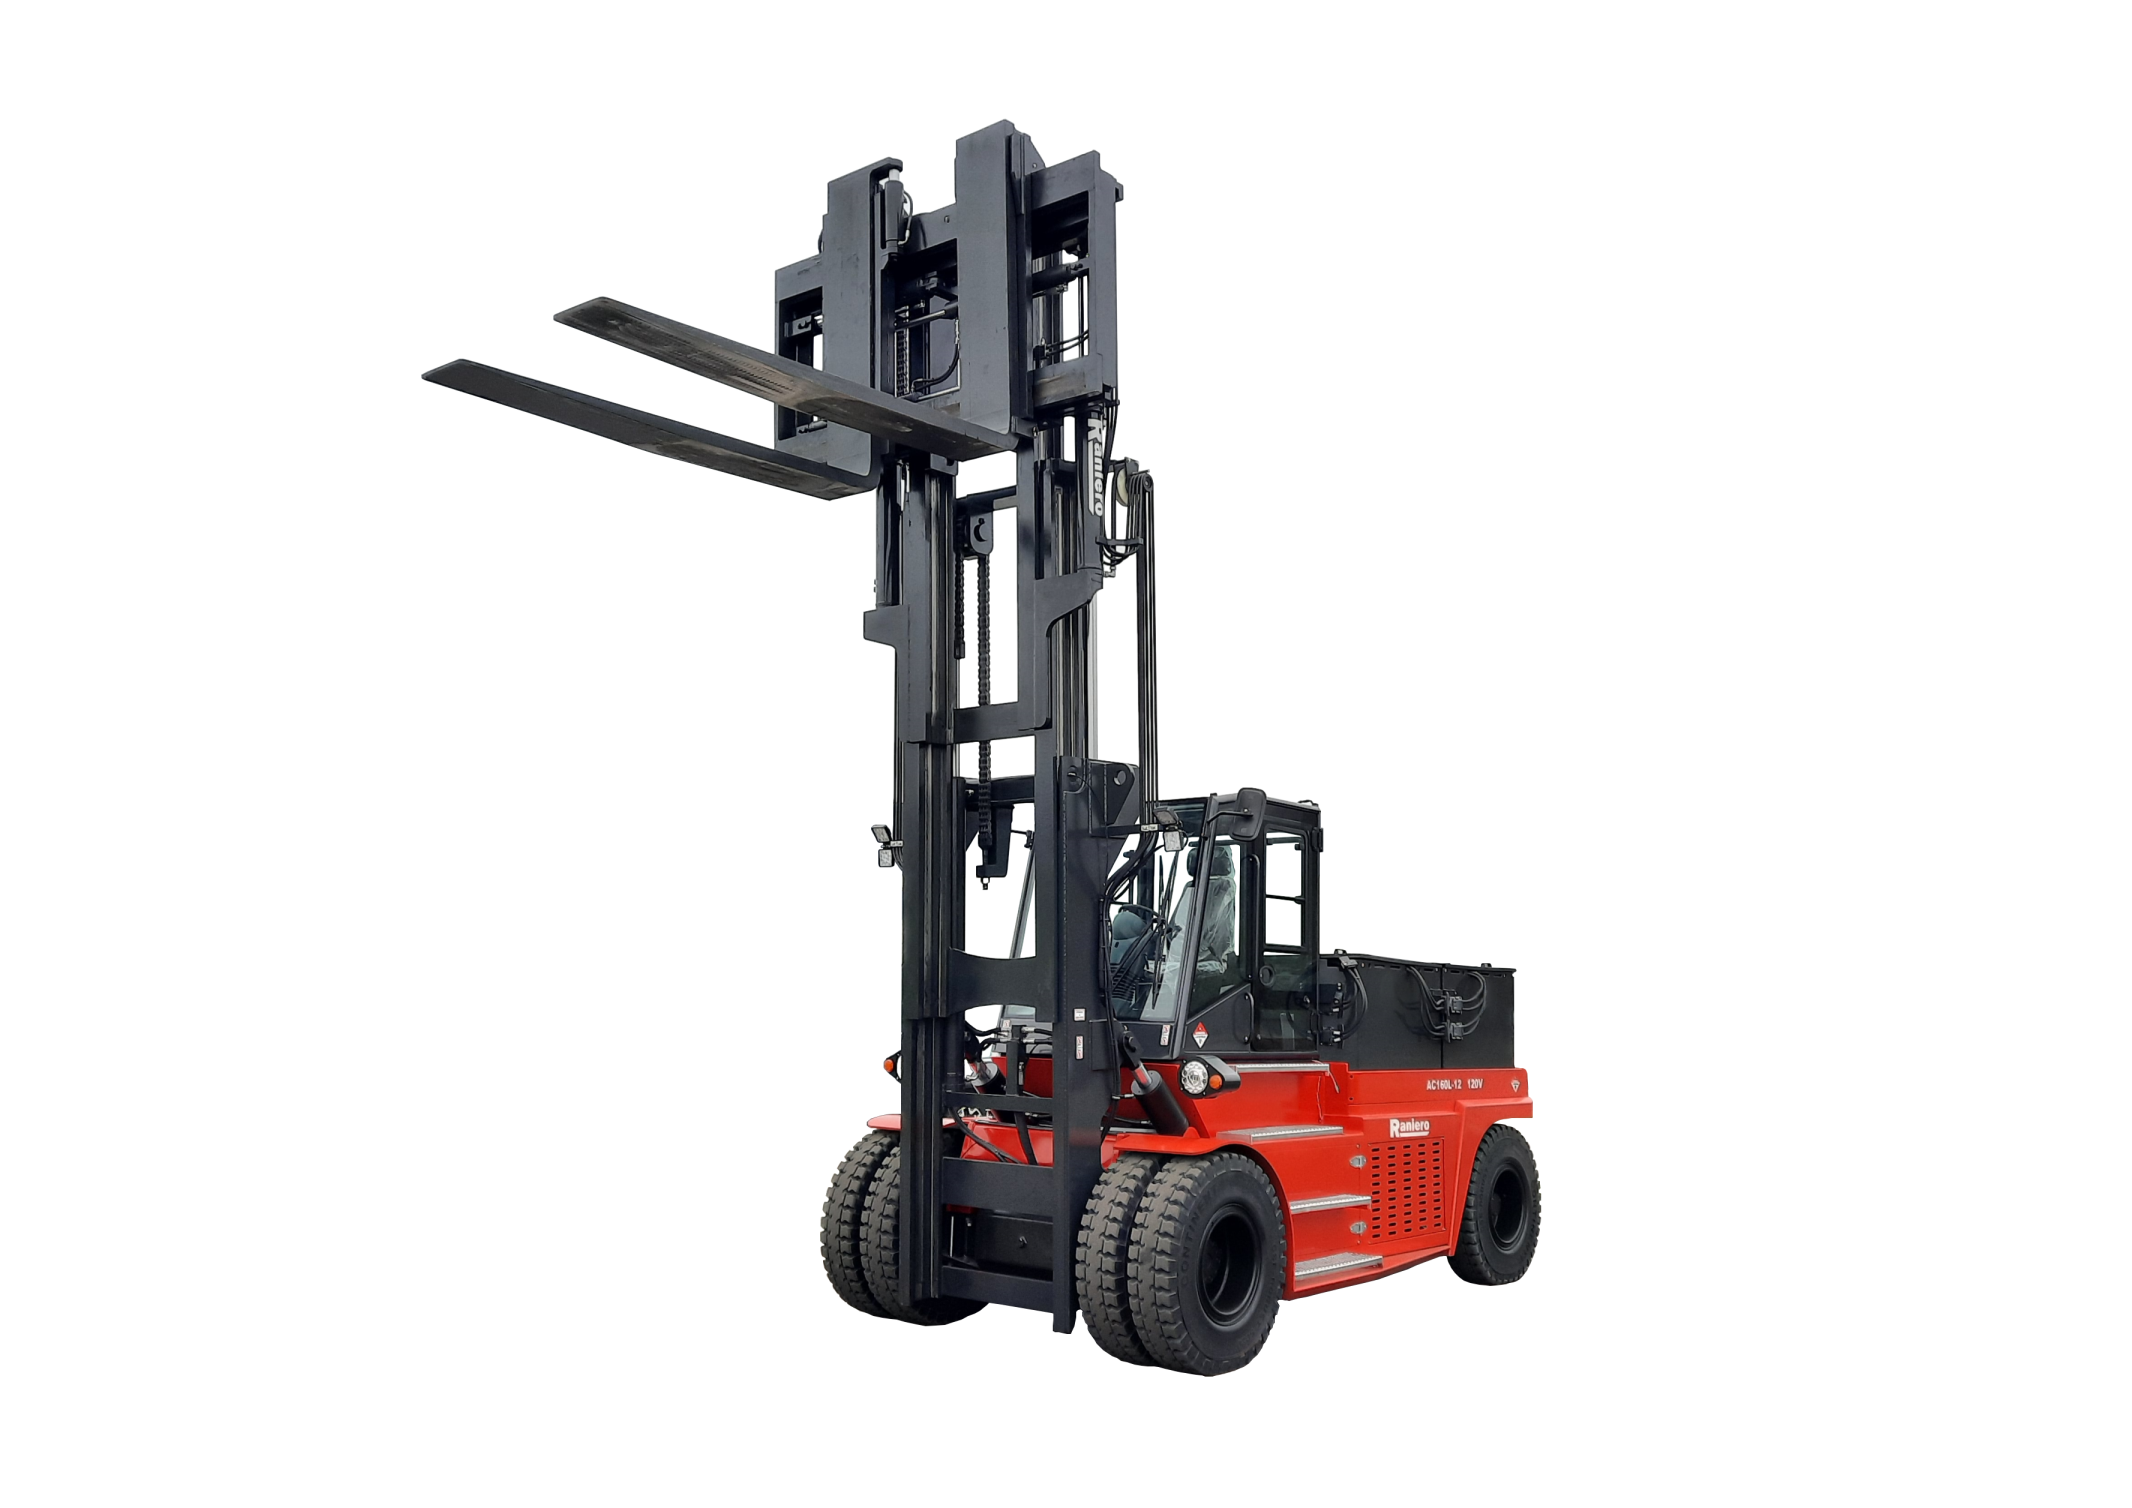 AC160L-12 - AC200L-12 120V is the new series of electric forklifts